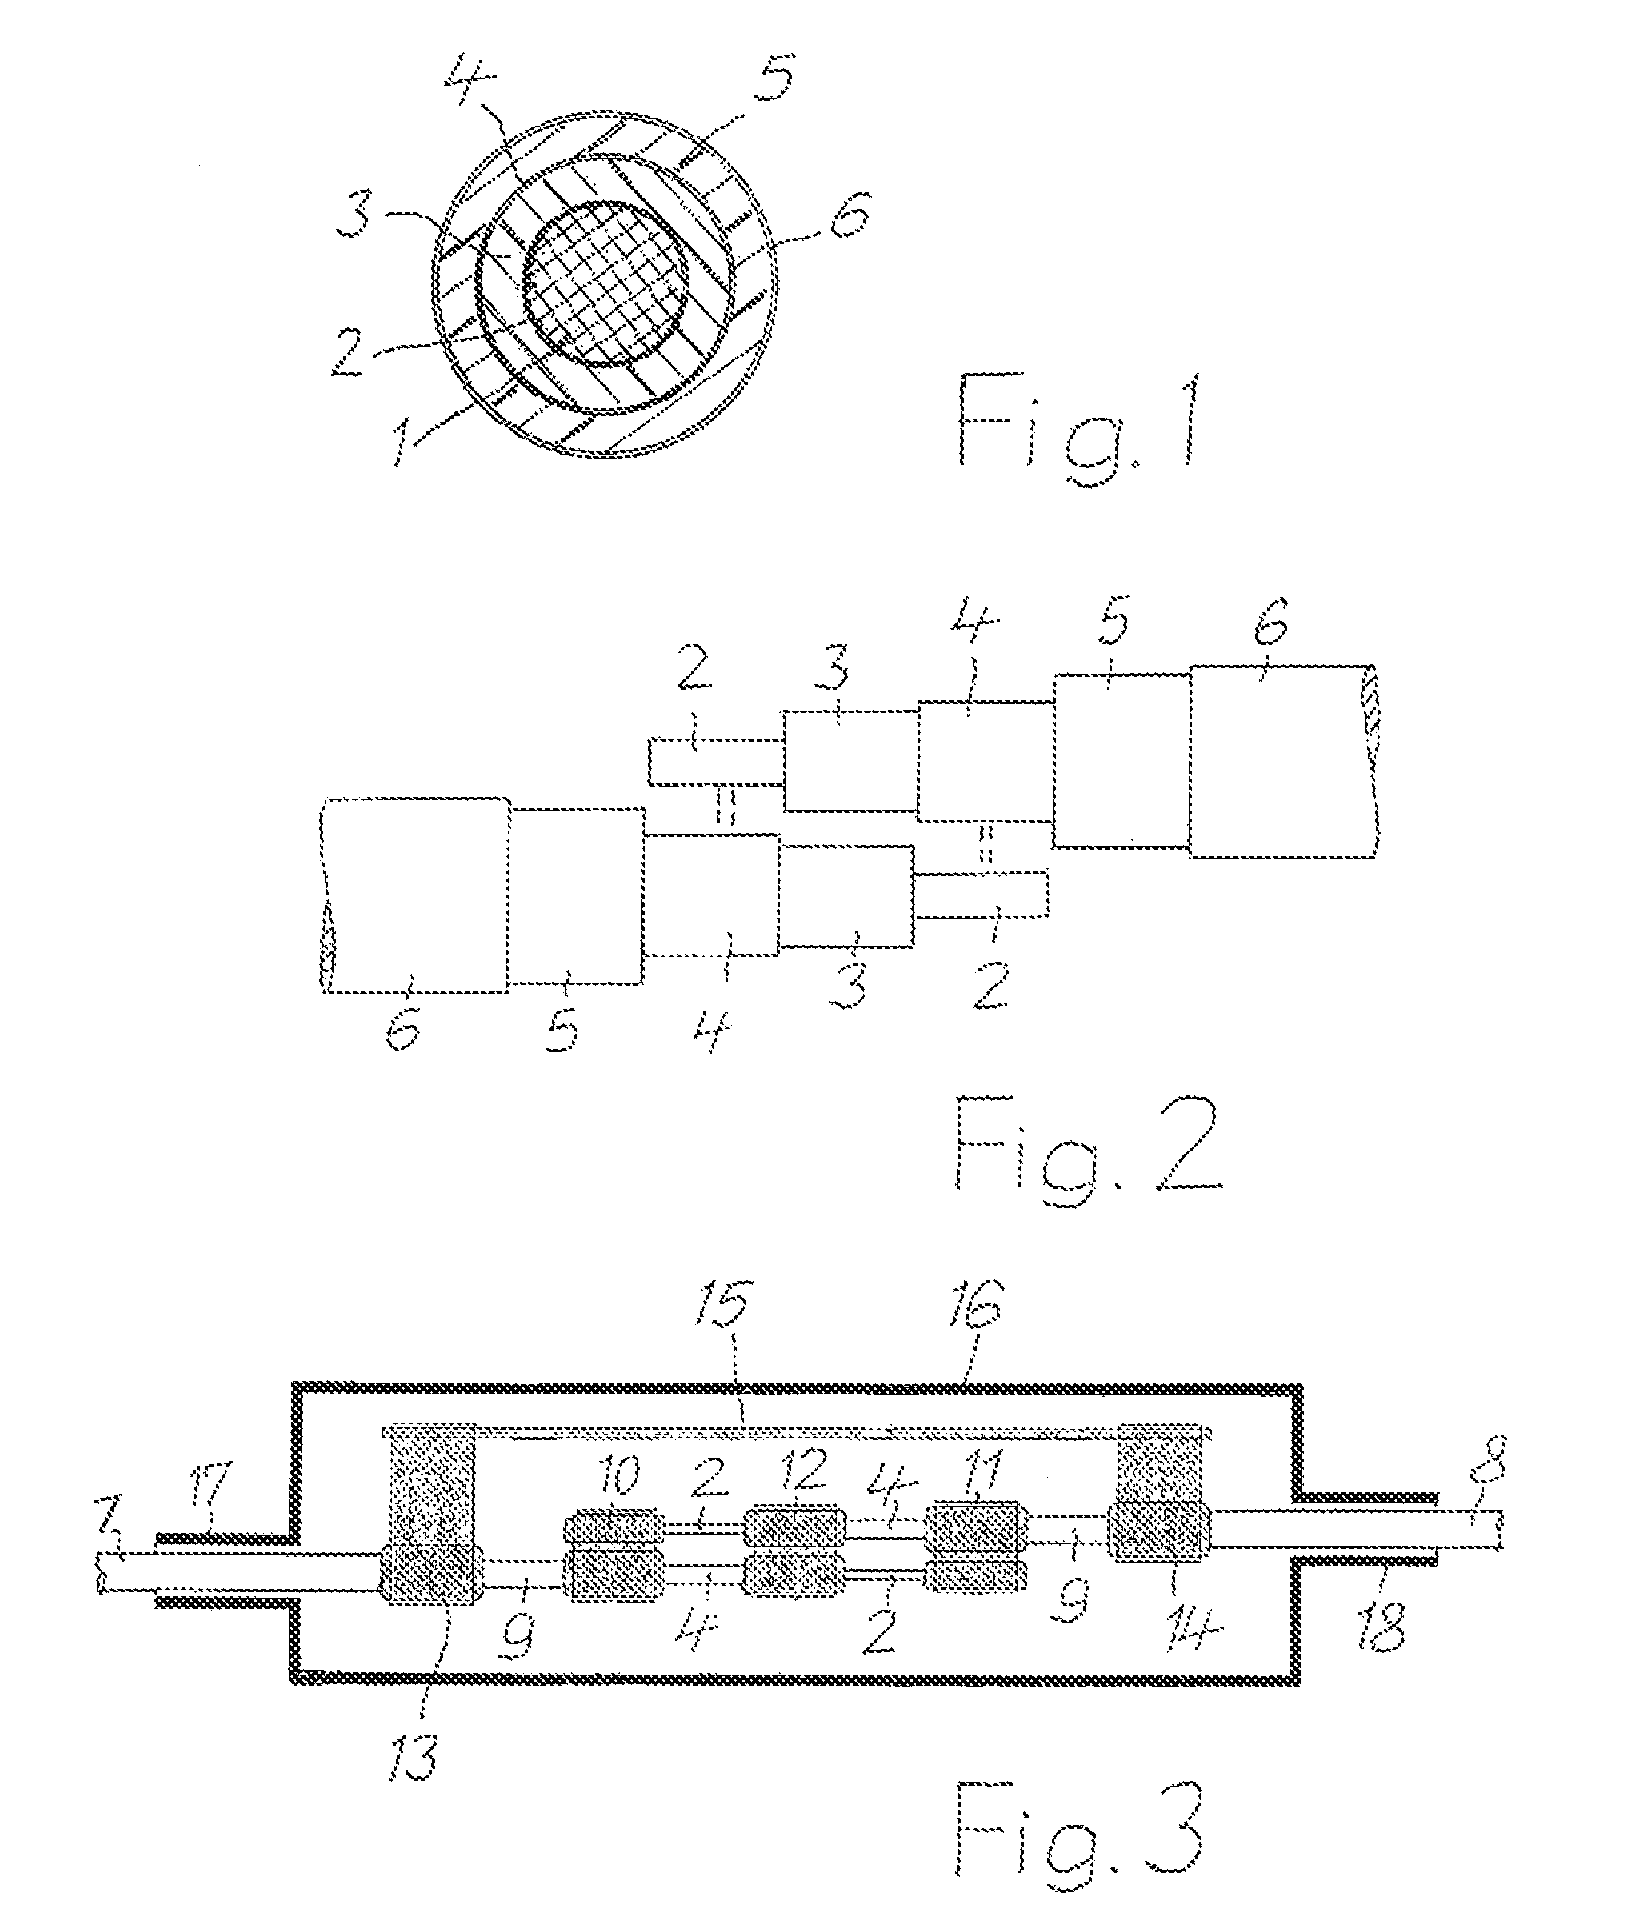 Method of electrically conductively connecting two superconductive cables